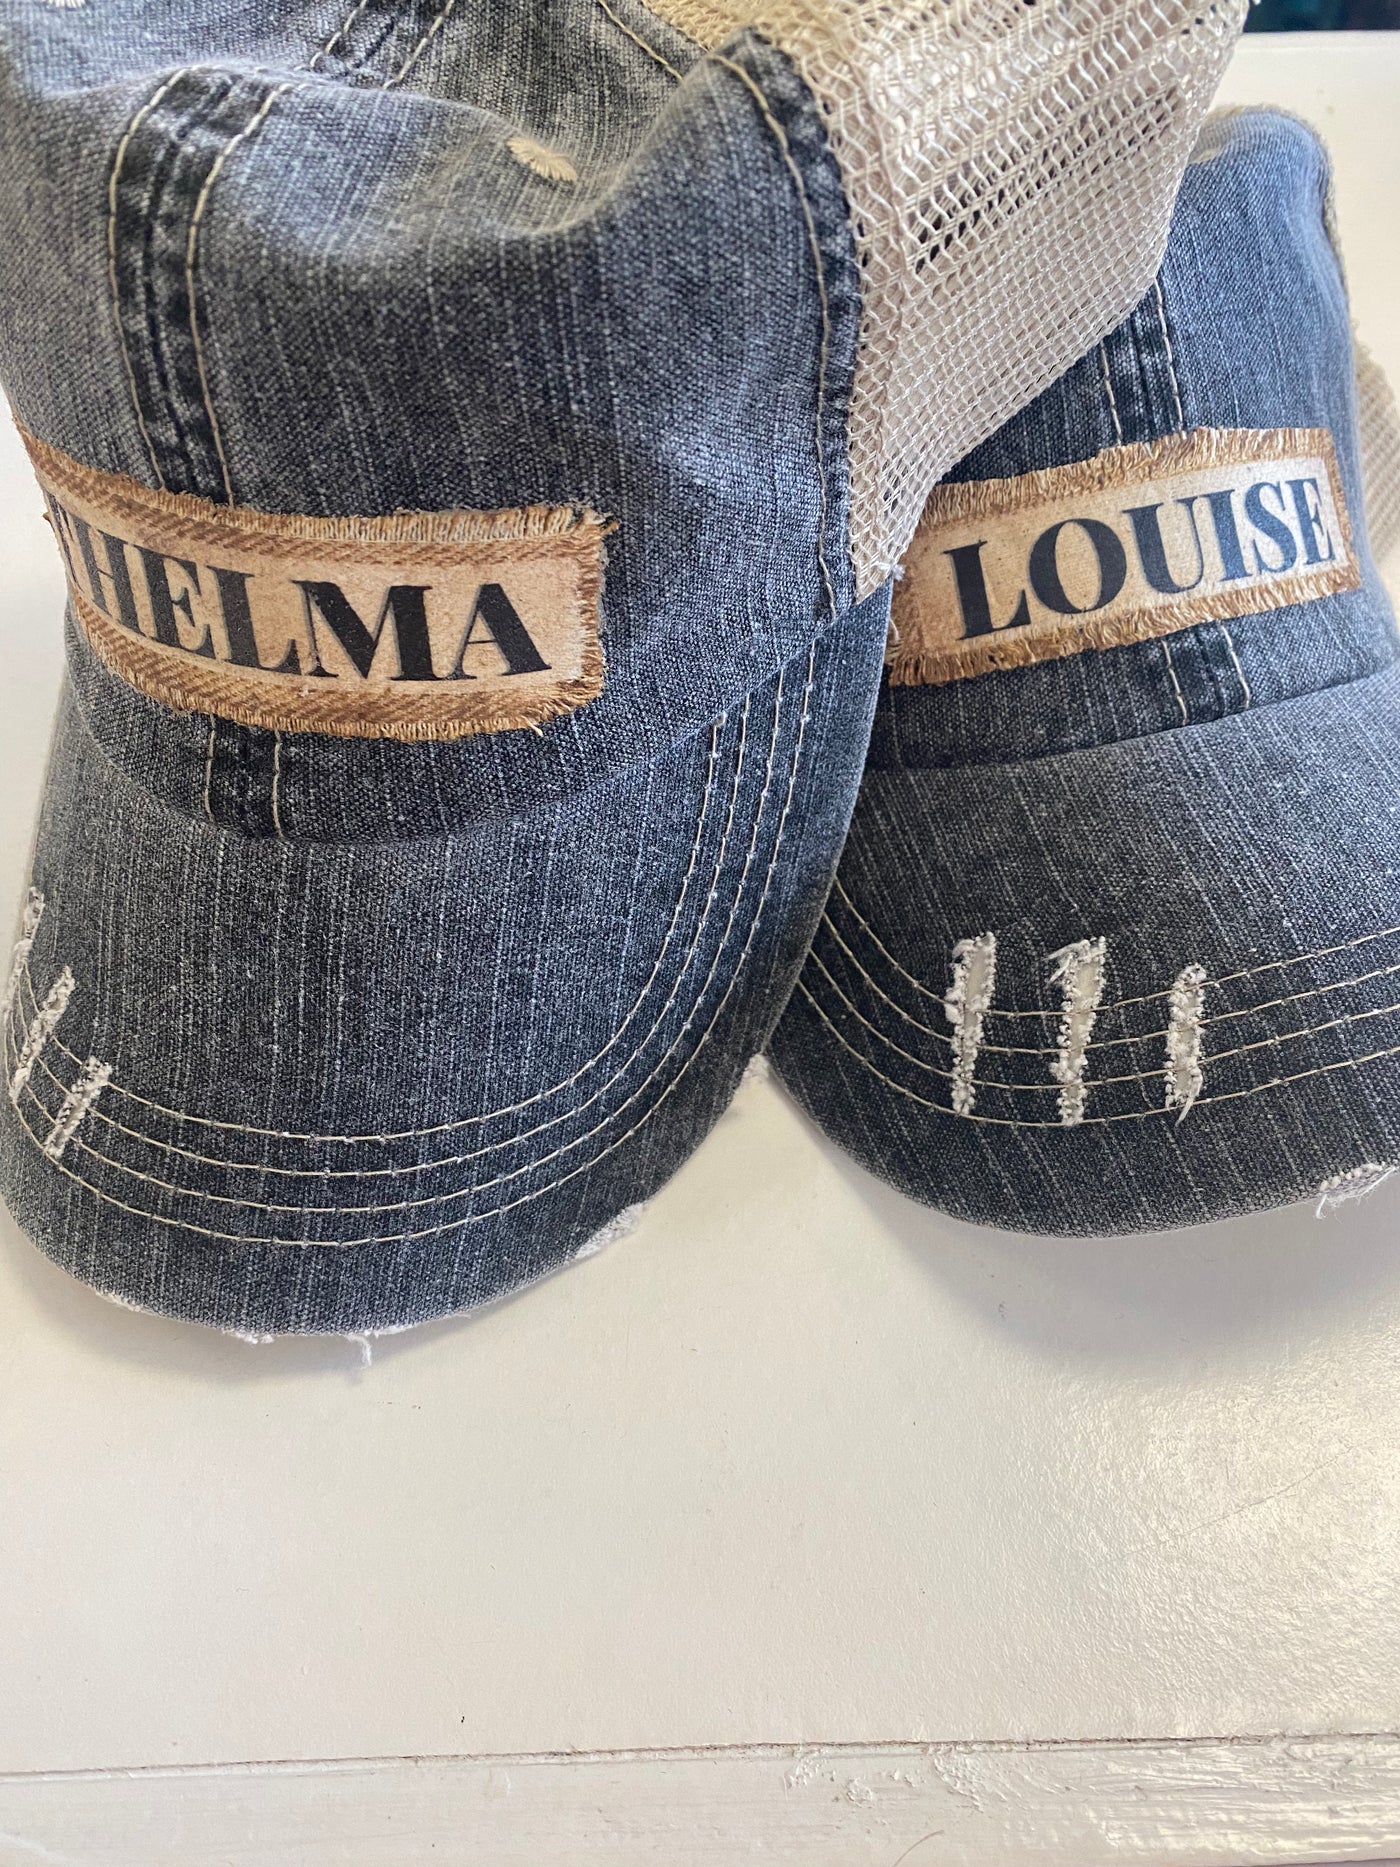 Thelma and Louise Hats (Thelma)